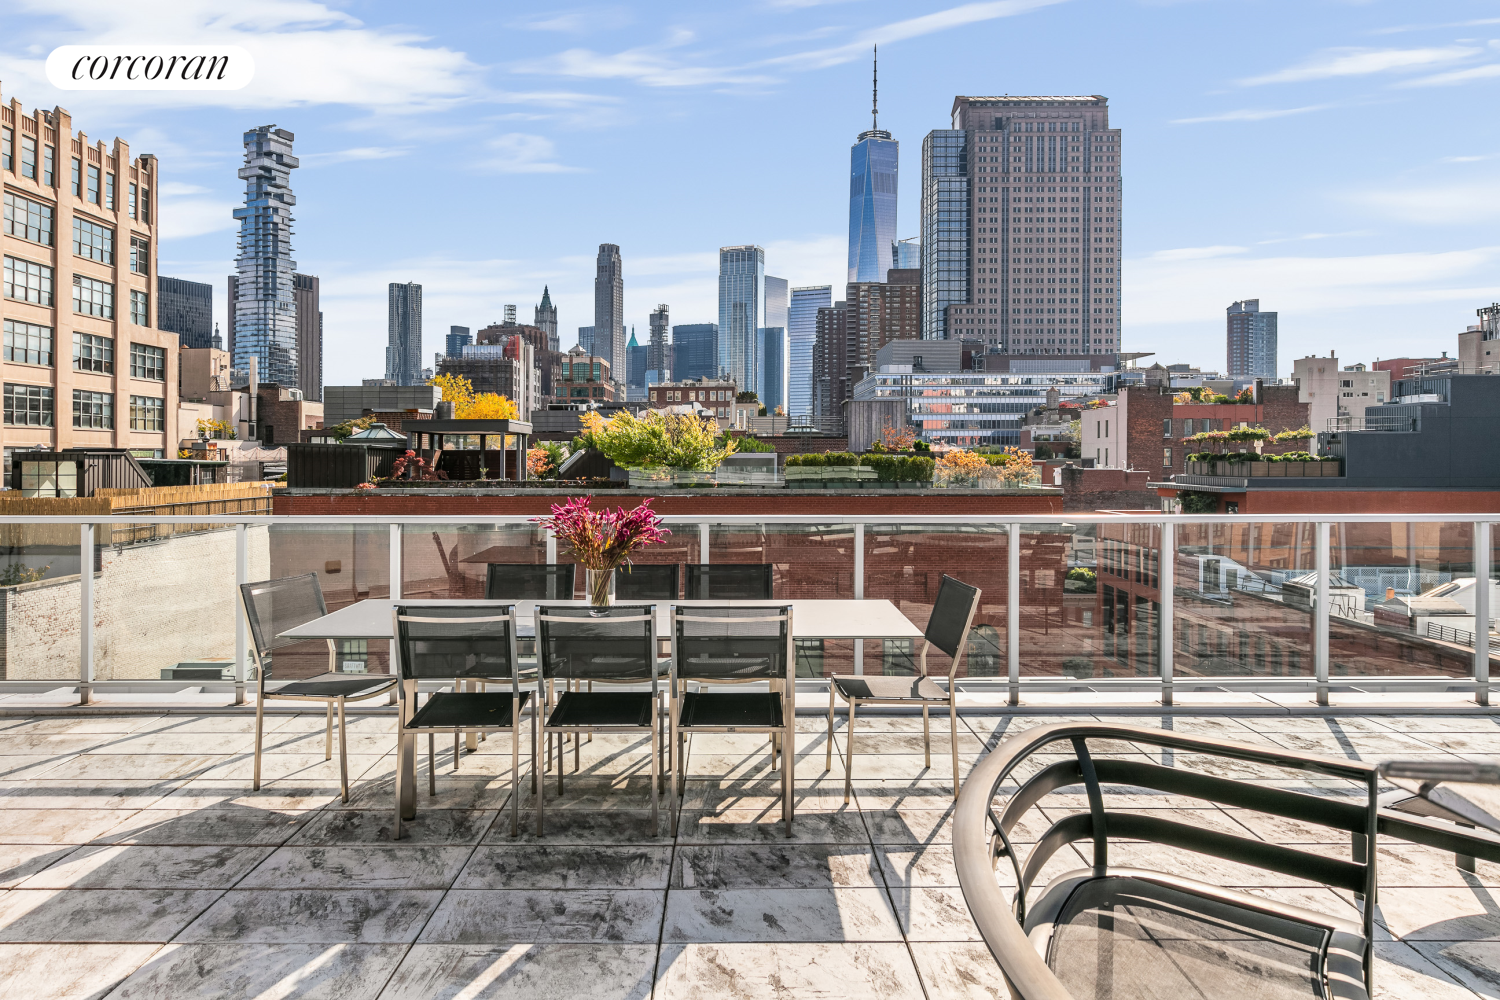 475 Greenwich Street Phs, Tribeca, Downtown, NYC - 3 Bedrooms  
2.5 Bathrooms  
6 Rooms - 